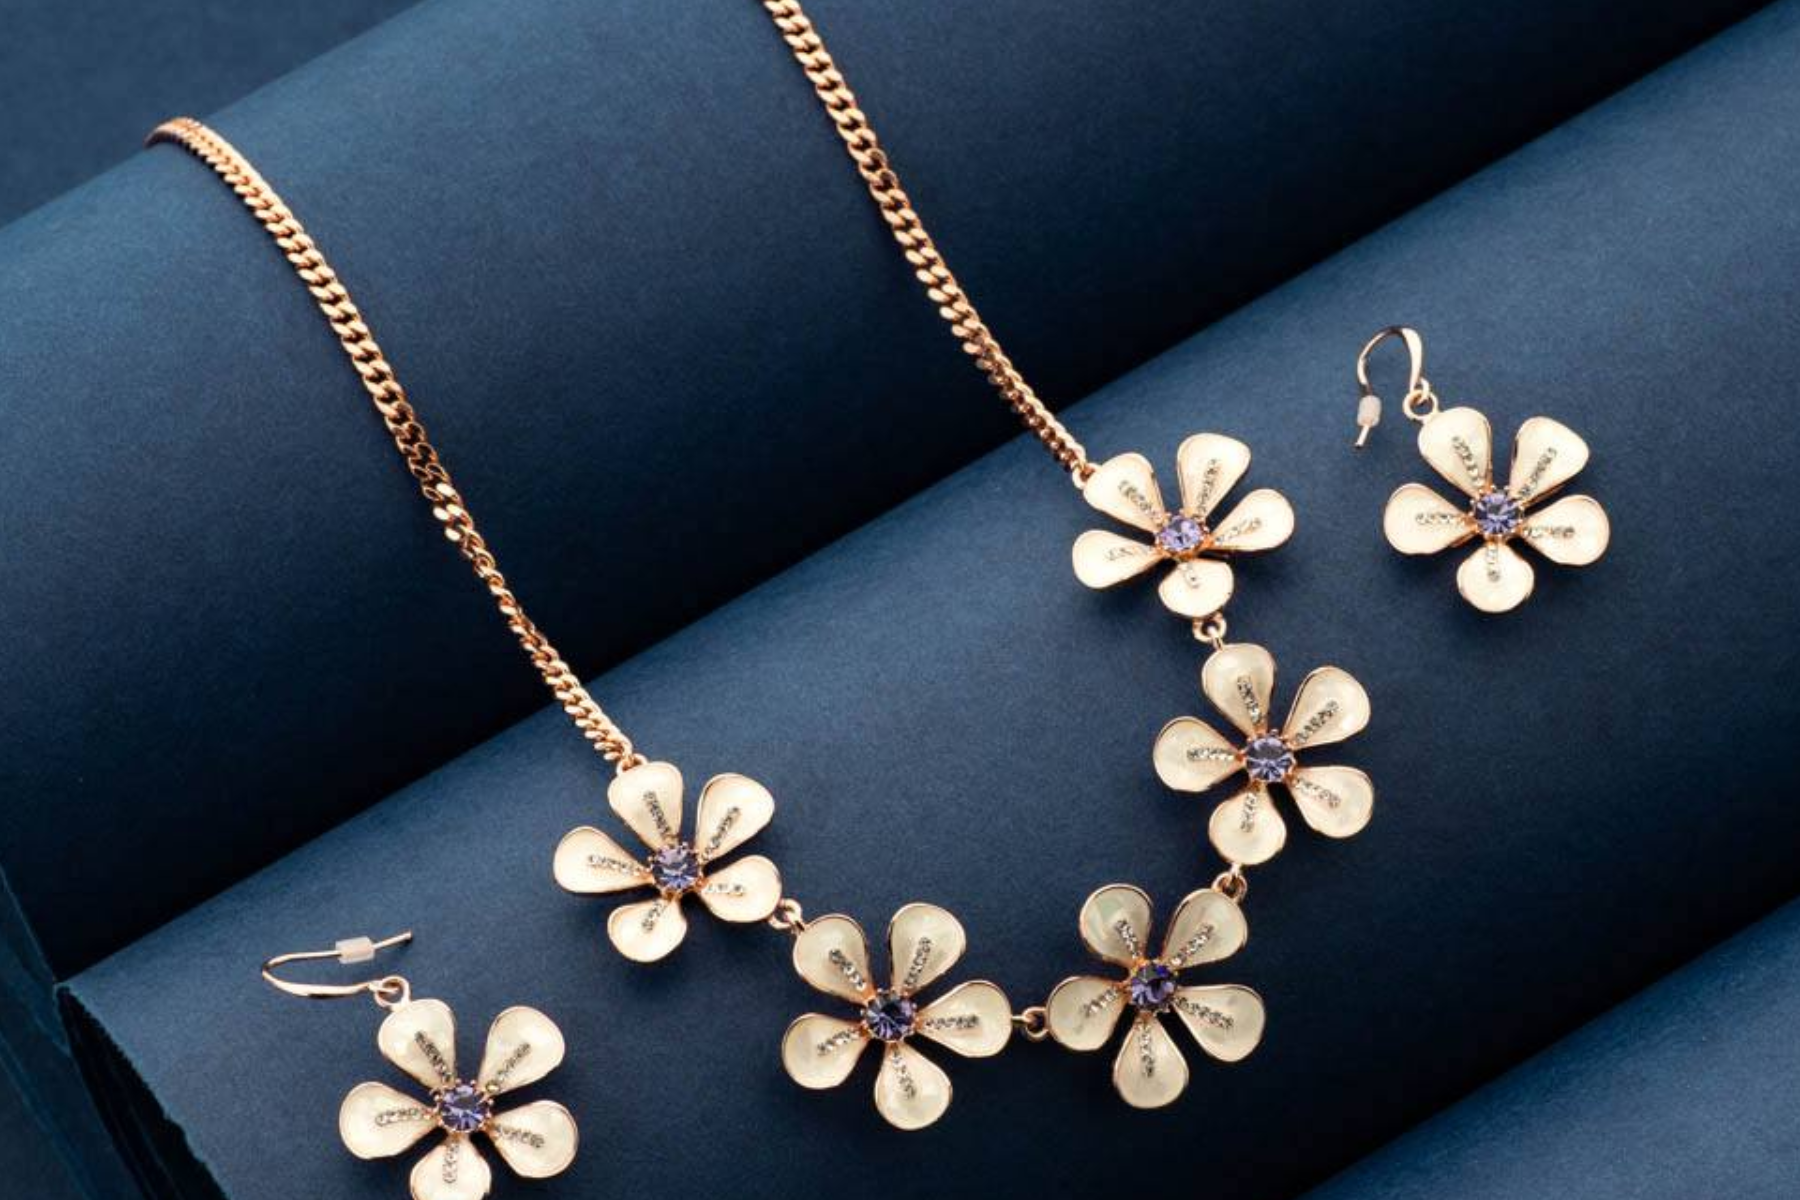 Gold Jewelry With Floral Design - Choose Your Favorite Flower